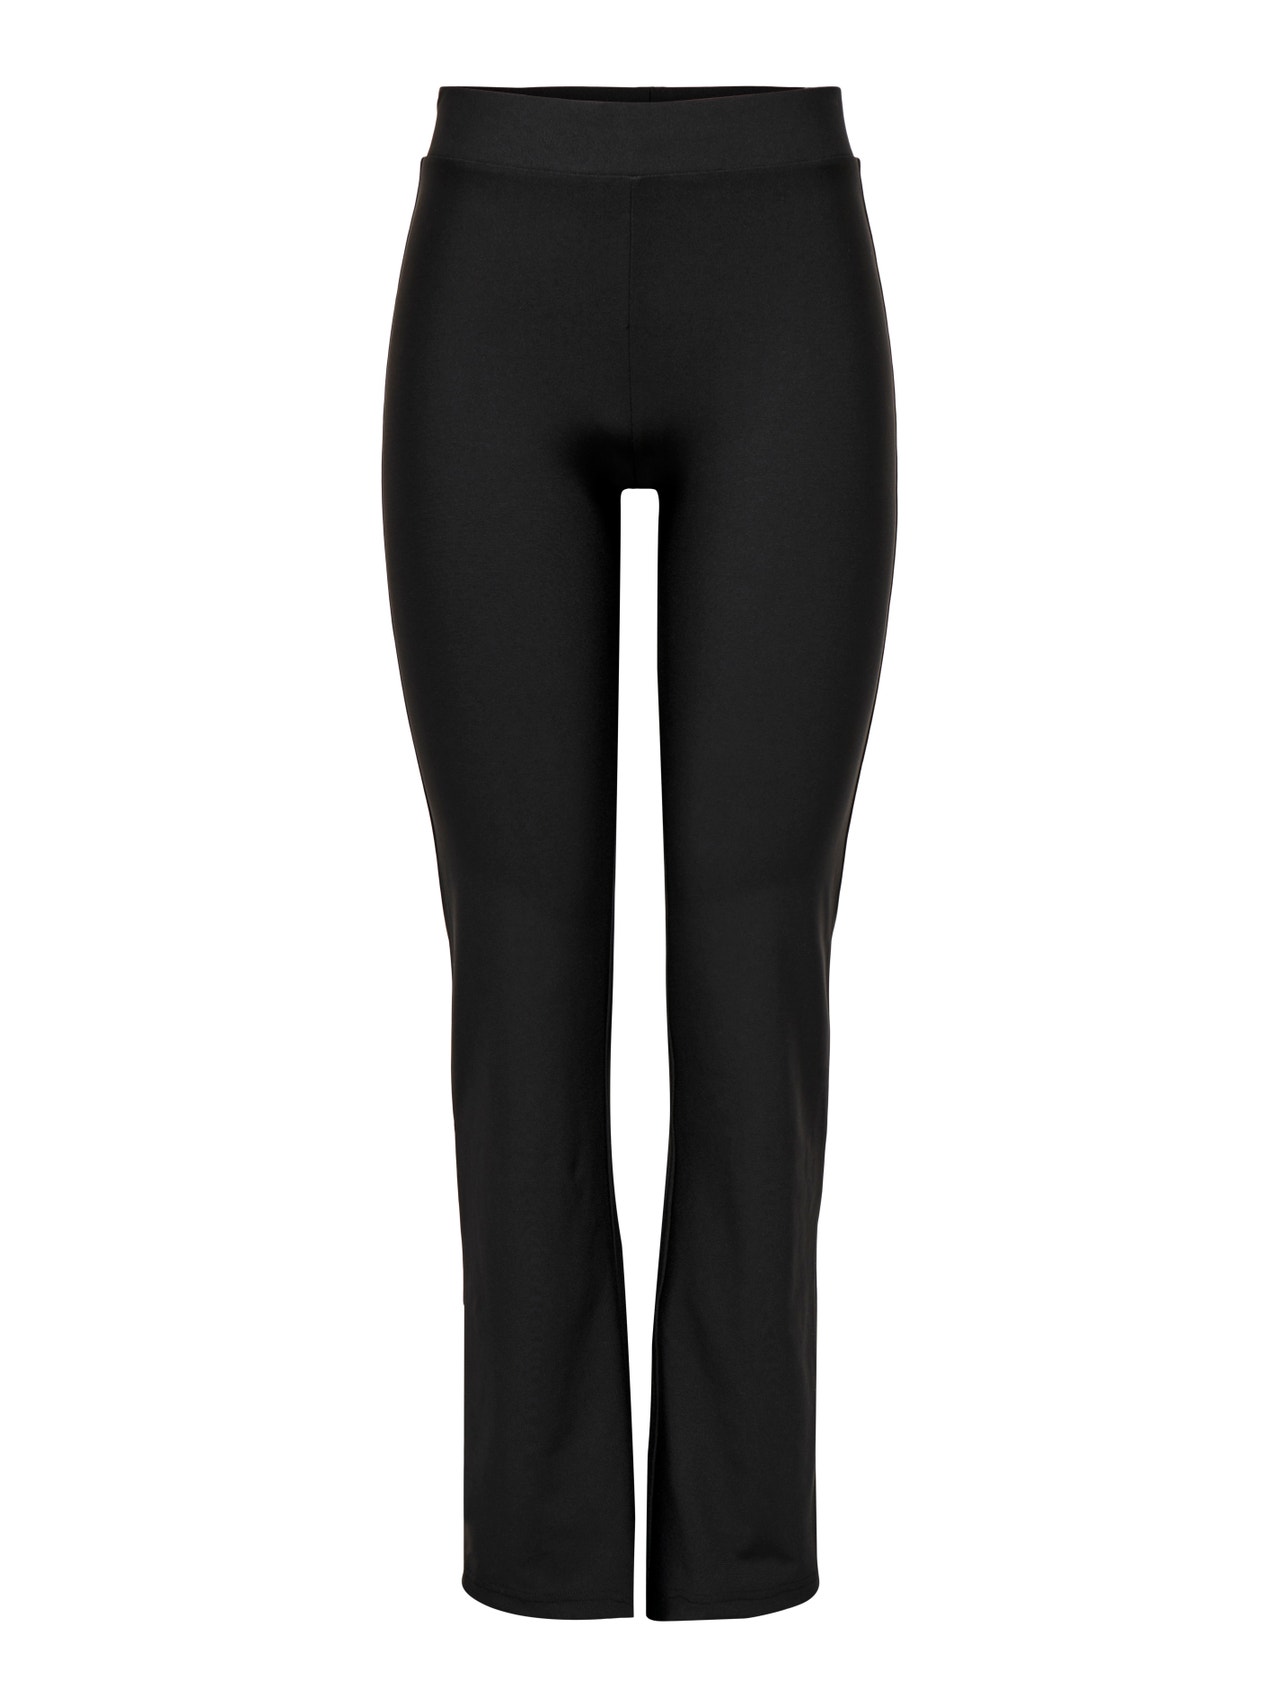 ONLY Training jazz trousers -Black - 15306577